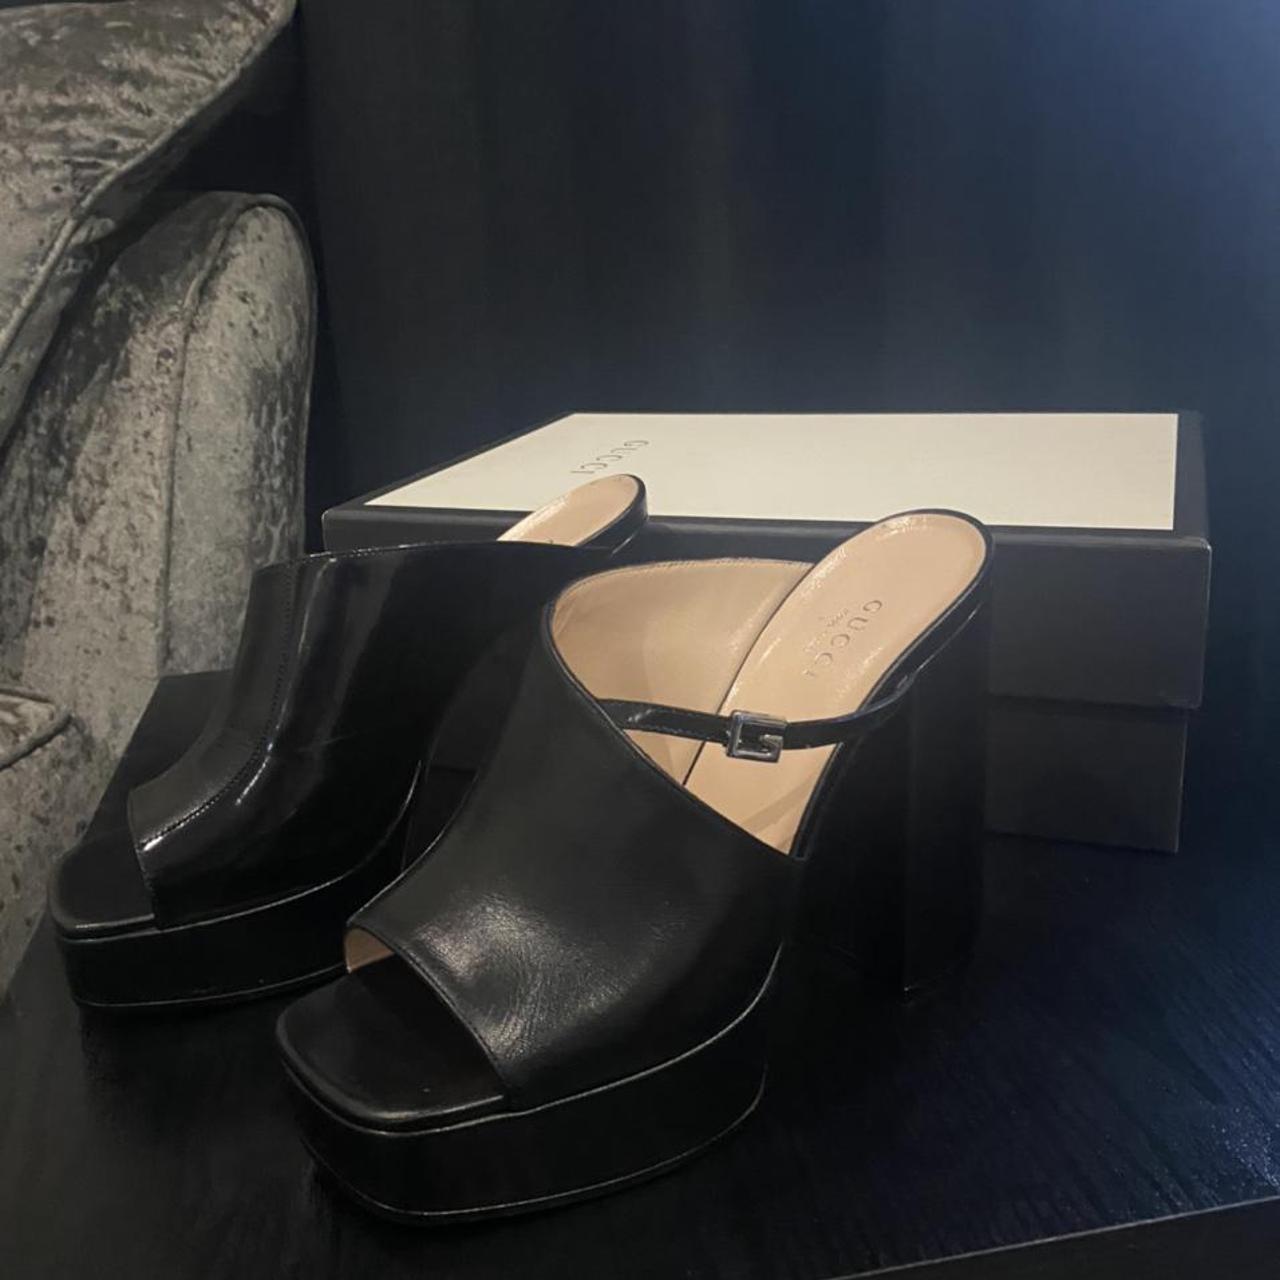 Product Image 1 - Authentic Gucci platforms in UK